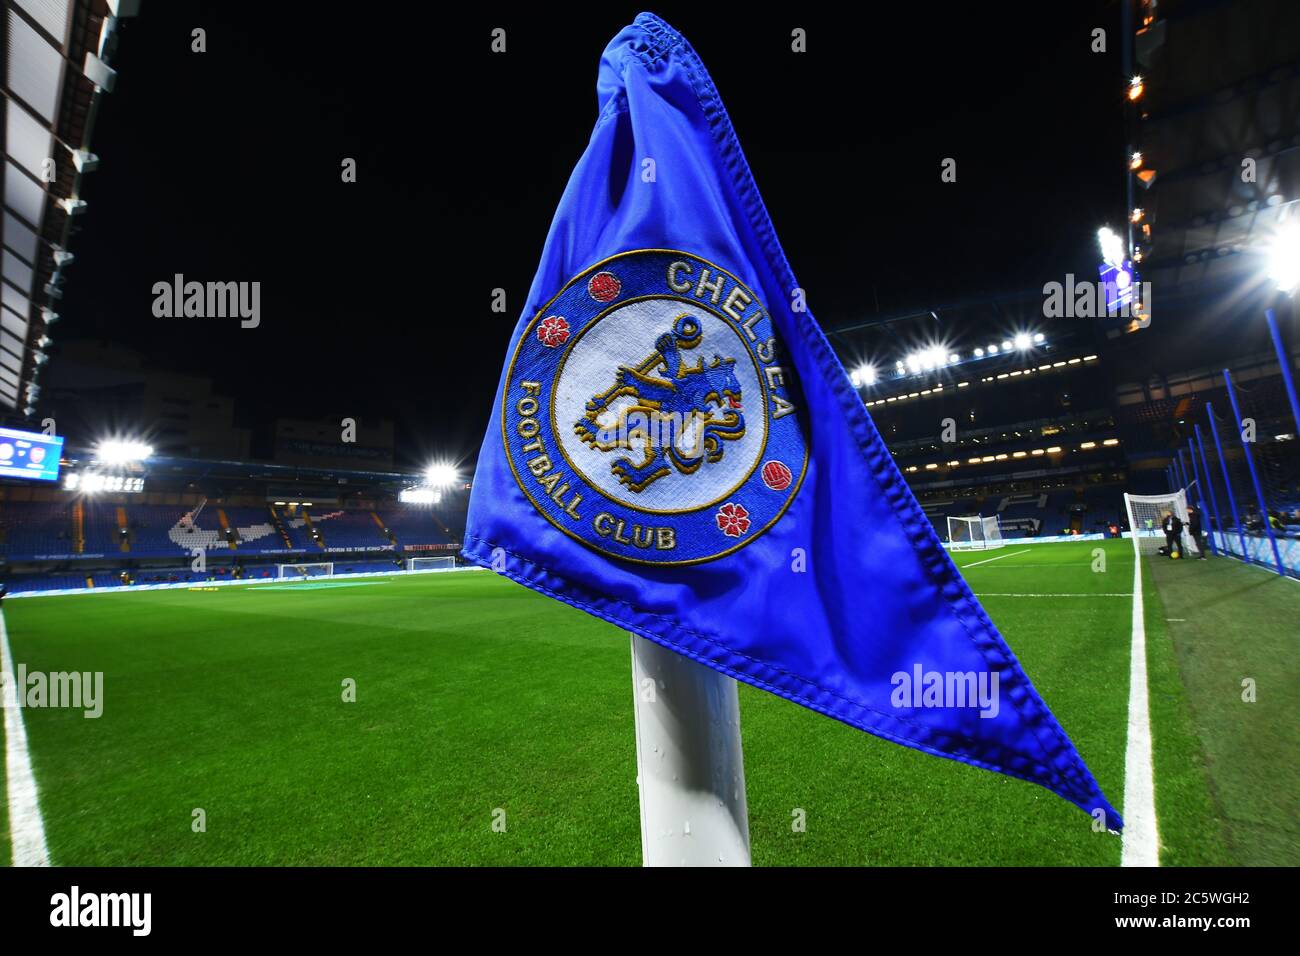 LONDON, ENGLAND - JANUARY 21, 2020: Corner flag with Chelsea crest pictured ahead of the 2019/20 Premier League game between Chelsea FC and Arsenal FC at Stamford Bridge. Stock Photo